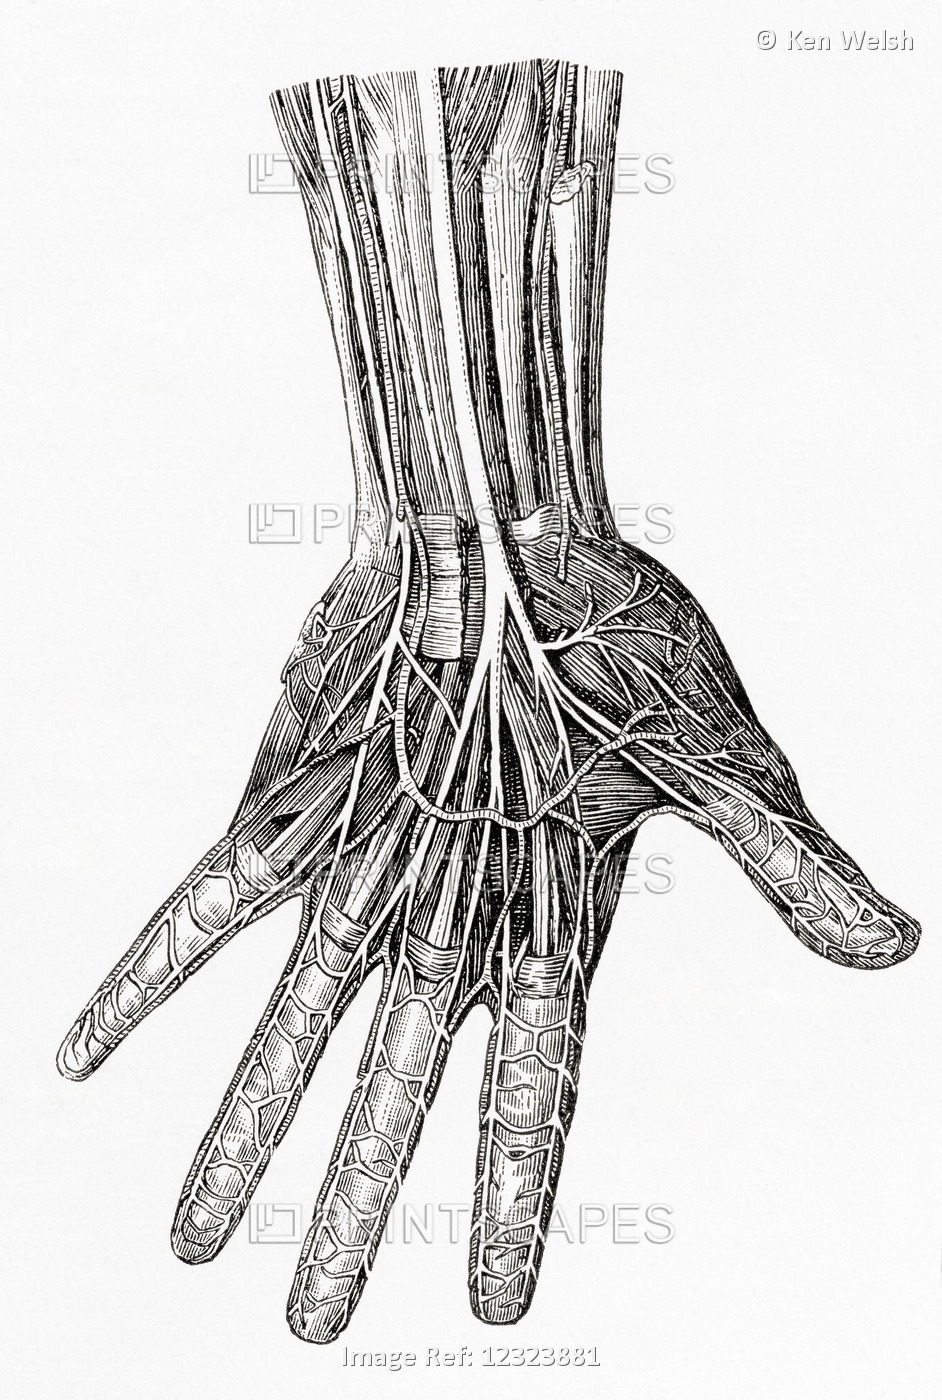 Diagram Showing The Nerves Of The Human Hand.  From Meyers Lexicon, Published ...